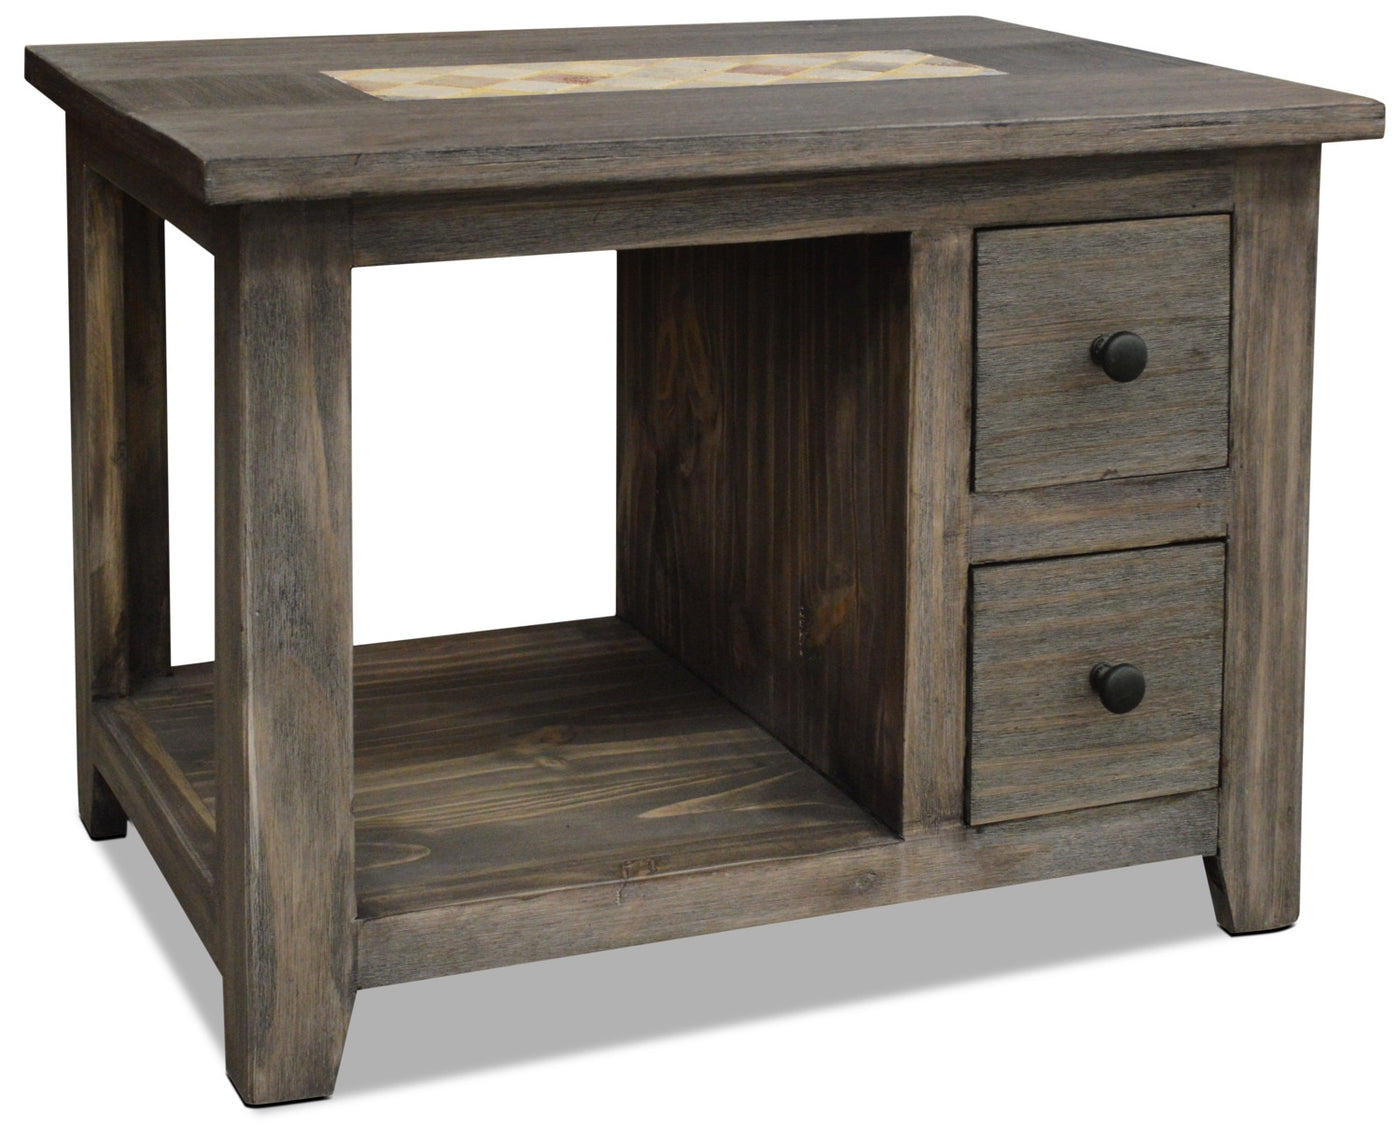 Santa Fe Rusticos Solid Pine End Table With Marble Inset Grey